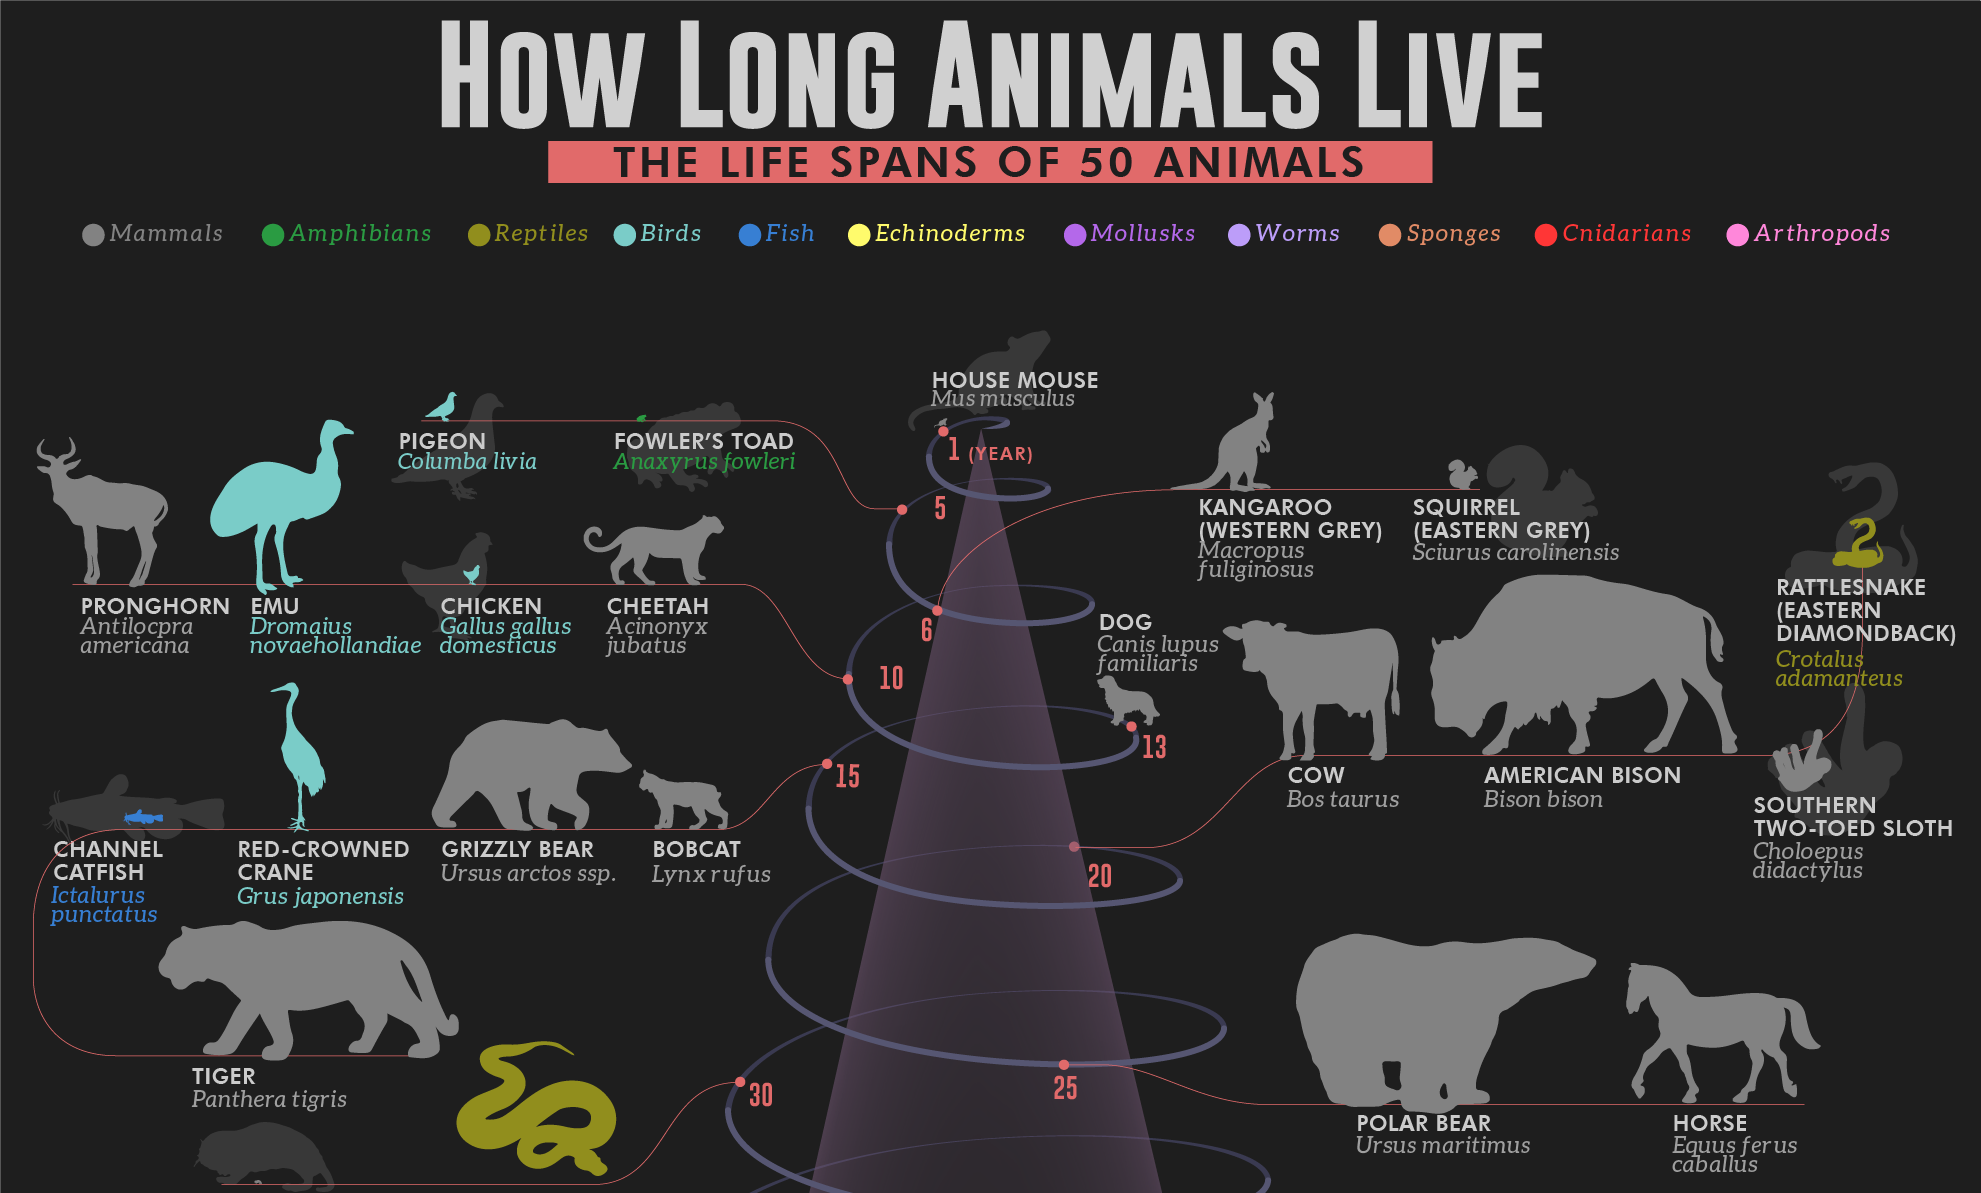 How Long Animals Live: The Life Spans of 50 Animals [Infographic]